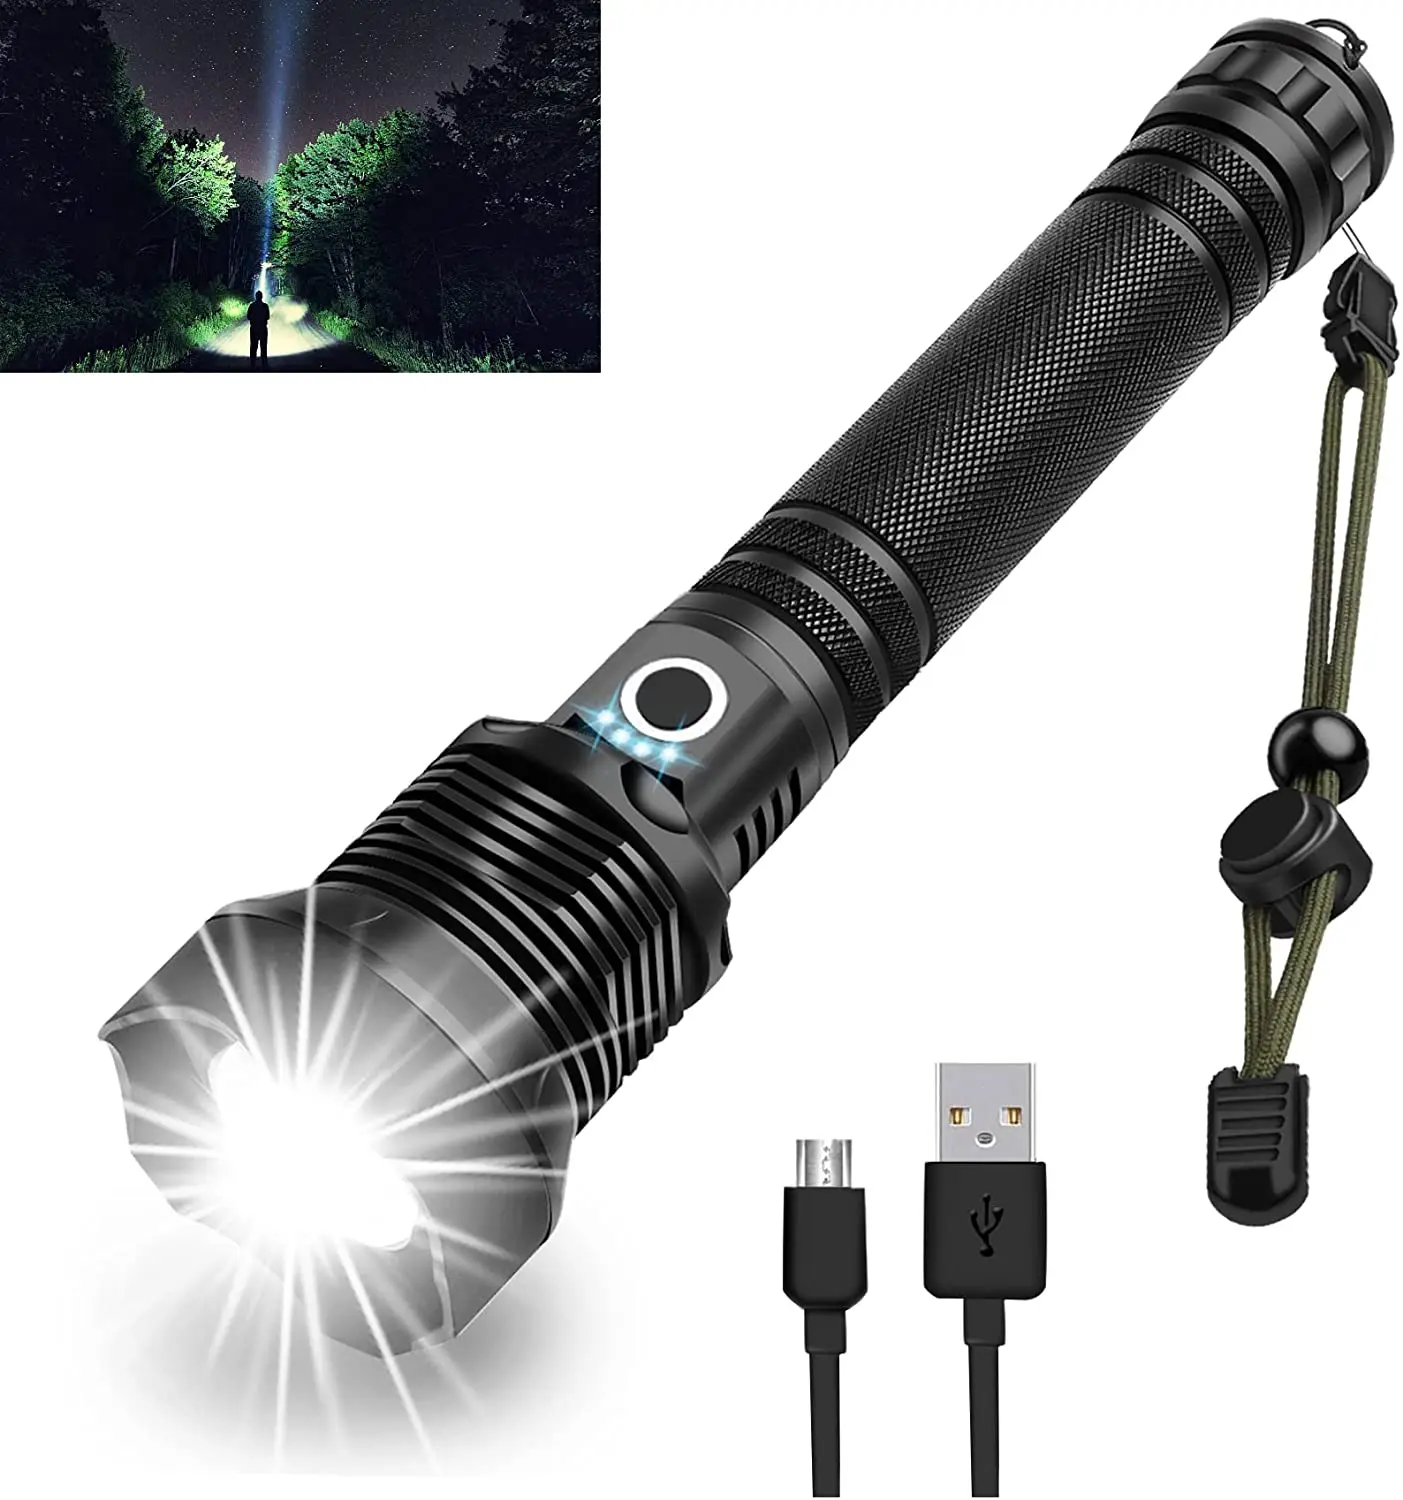 

Rechargeable LED Flashlight 92000 High Lumen Flashlight Waterproof Zoomable Tactical Flashlights for Emergency Camping Walking